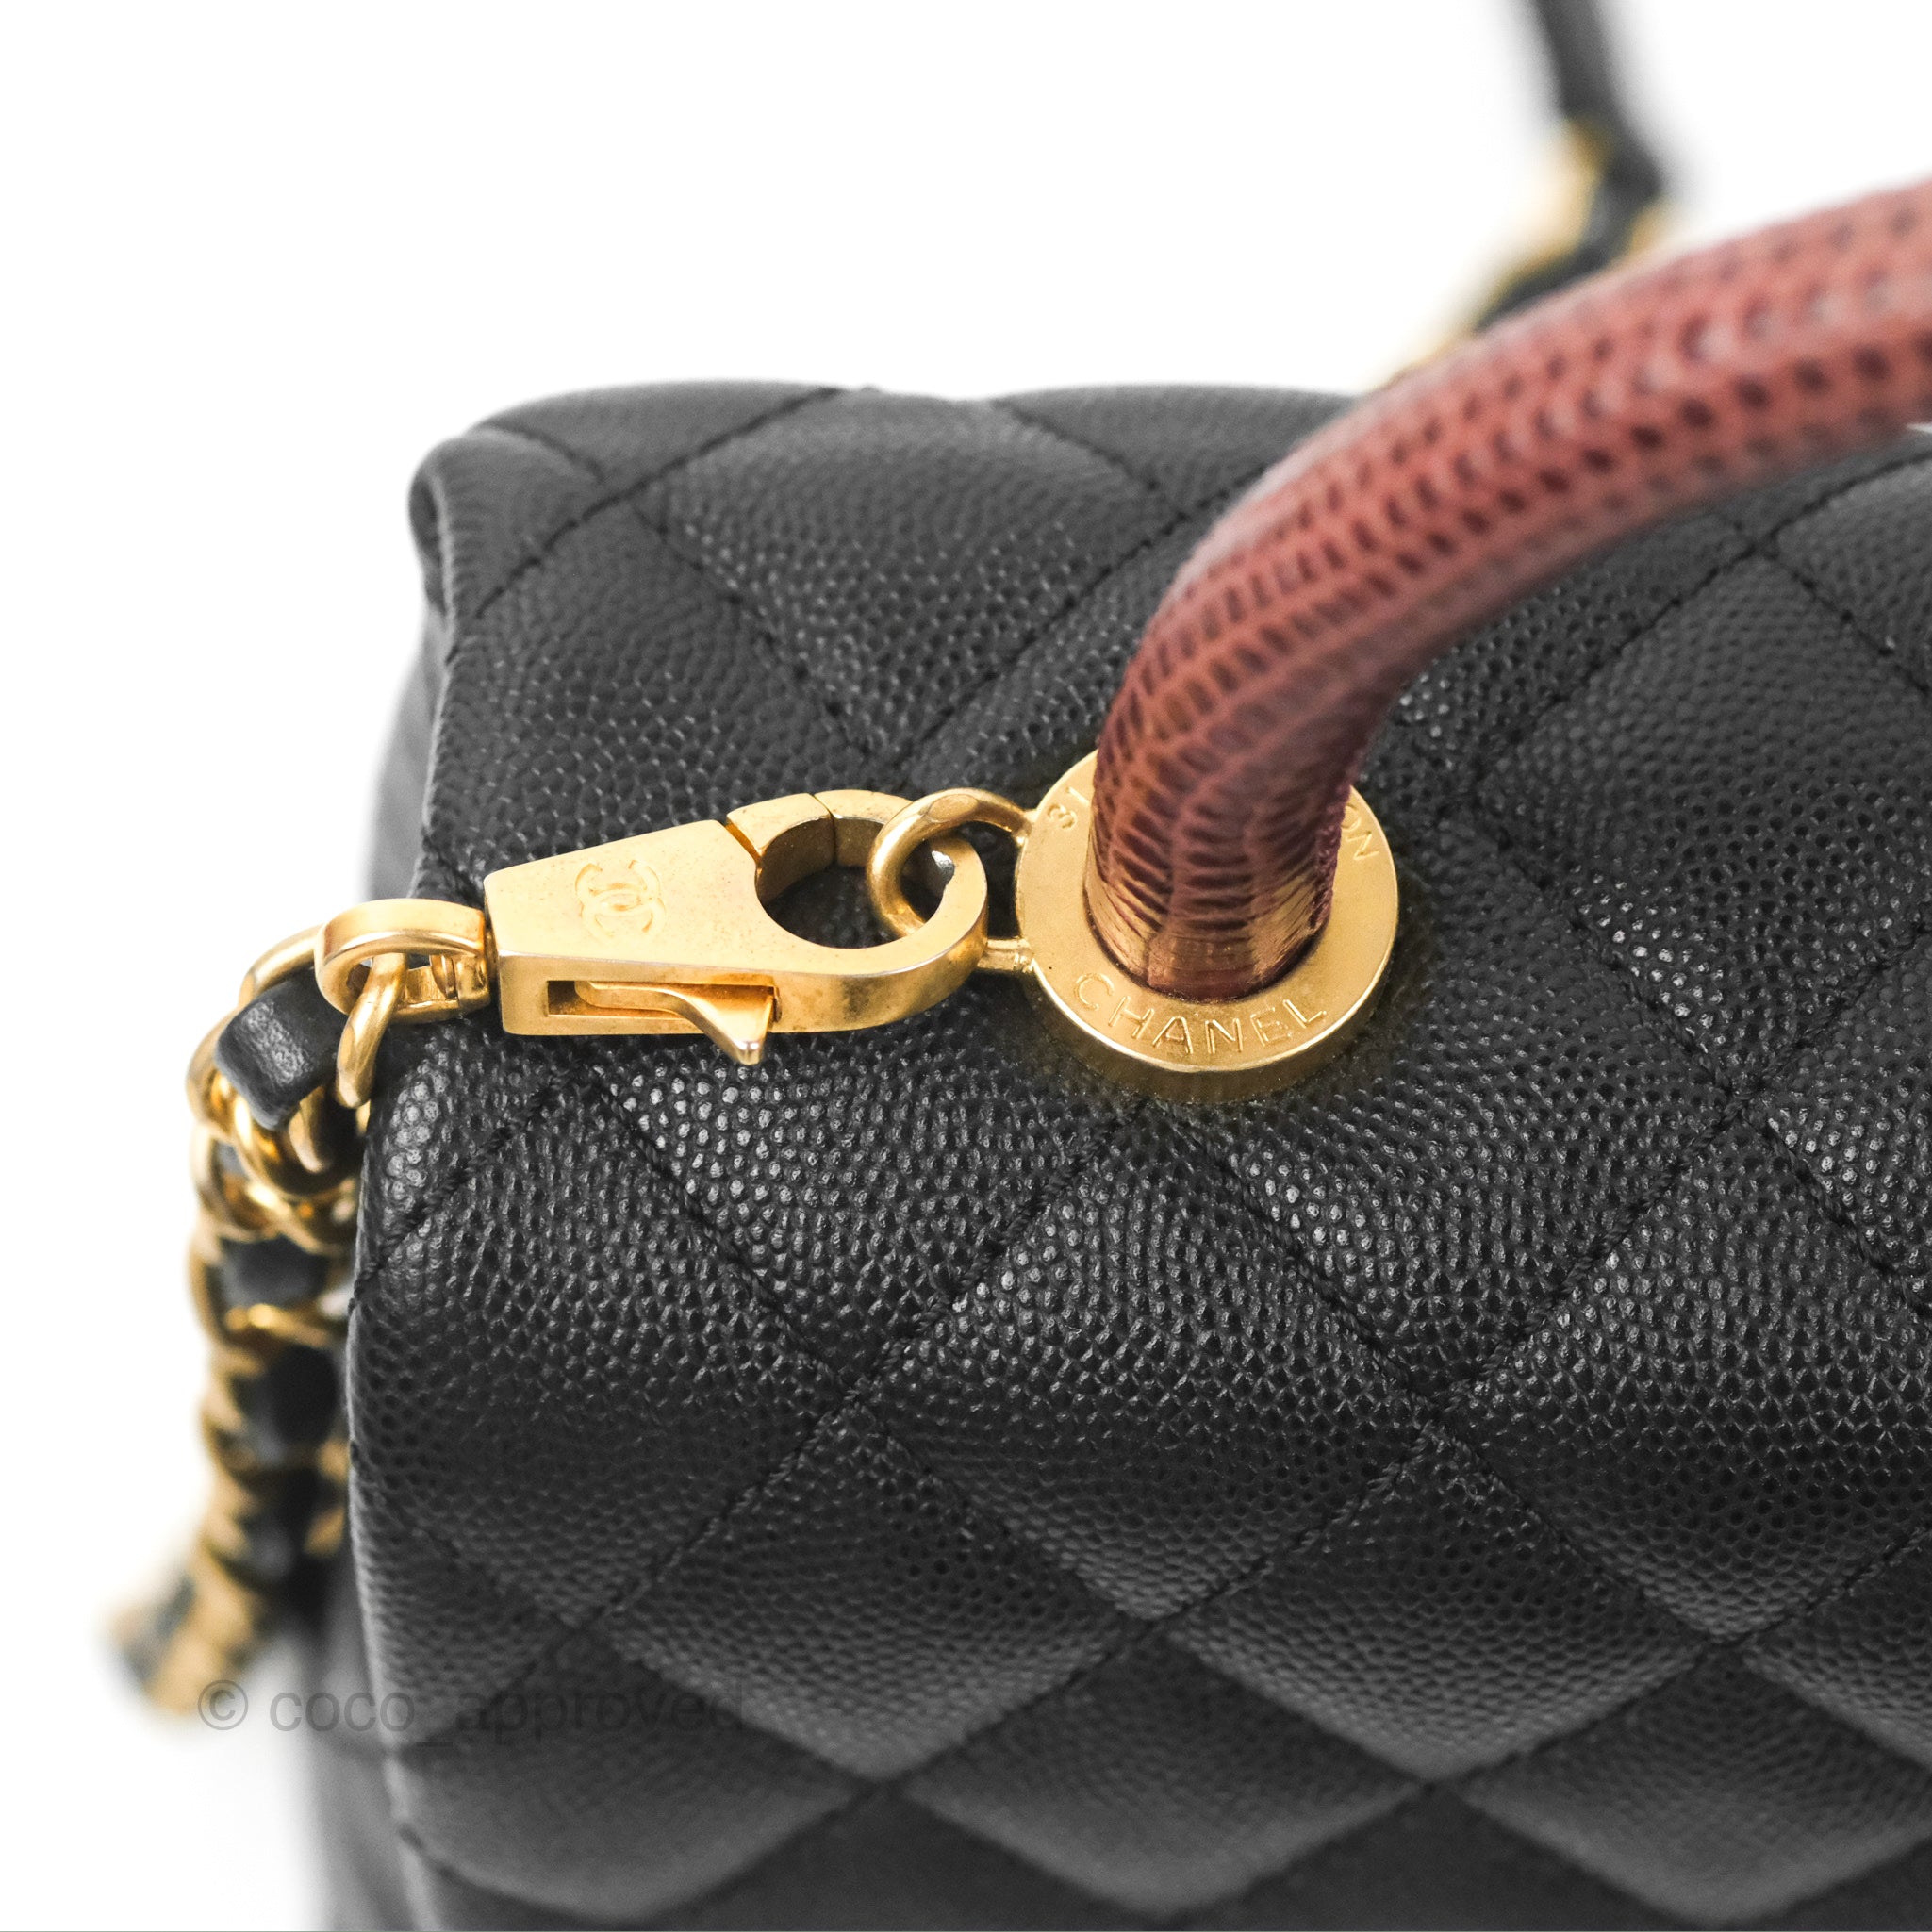 Chanel Medium Lizard-Trim Coco Handle Caviar Quilted Red Flap Bag